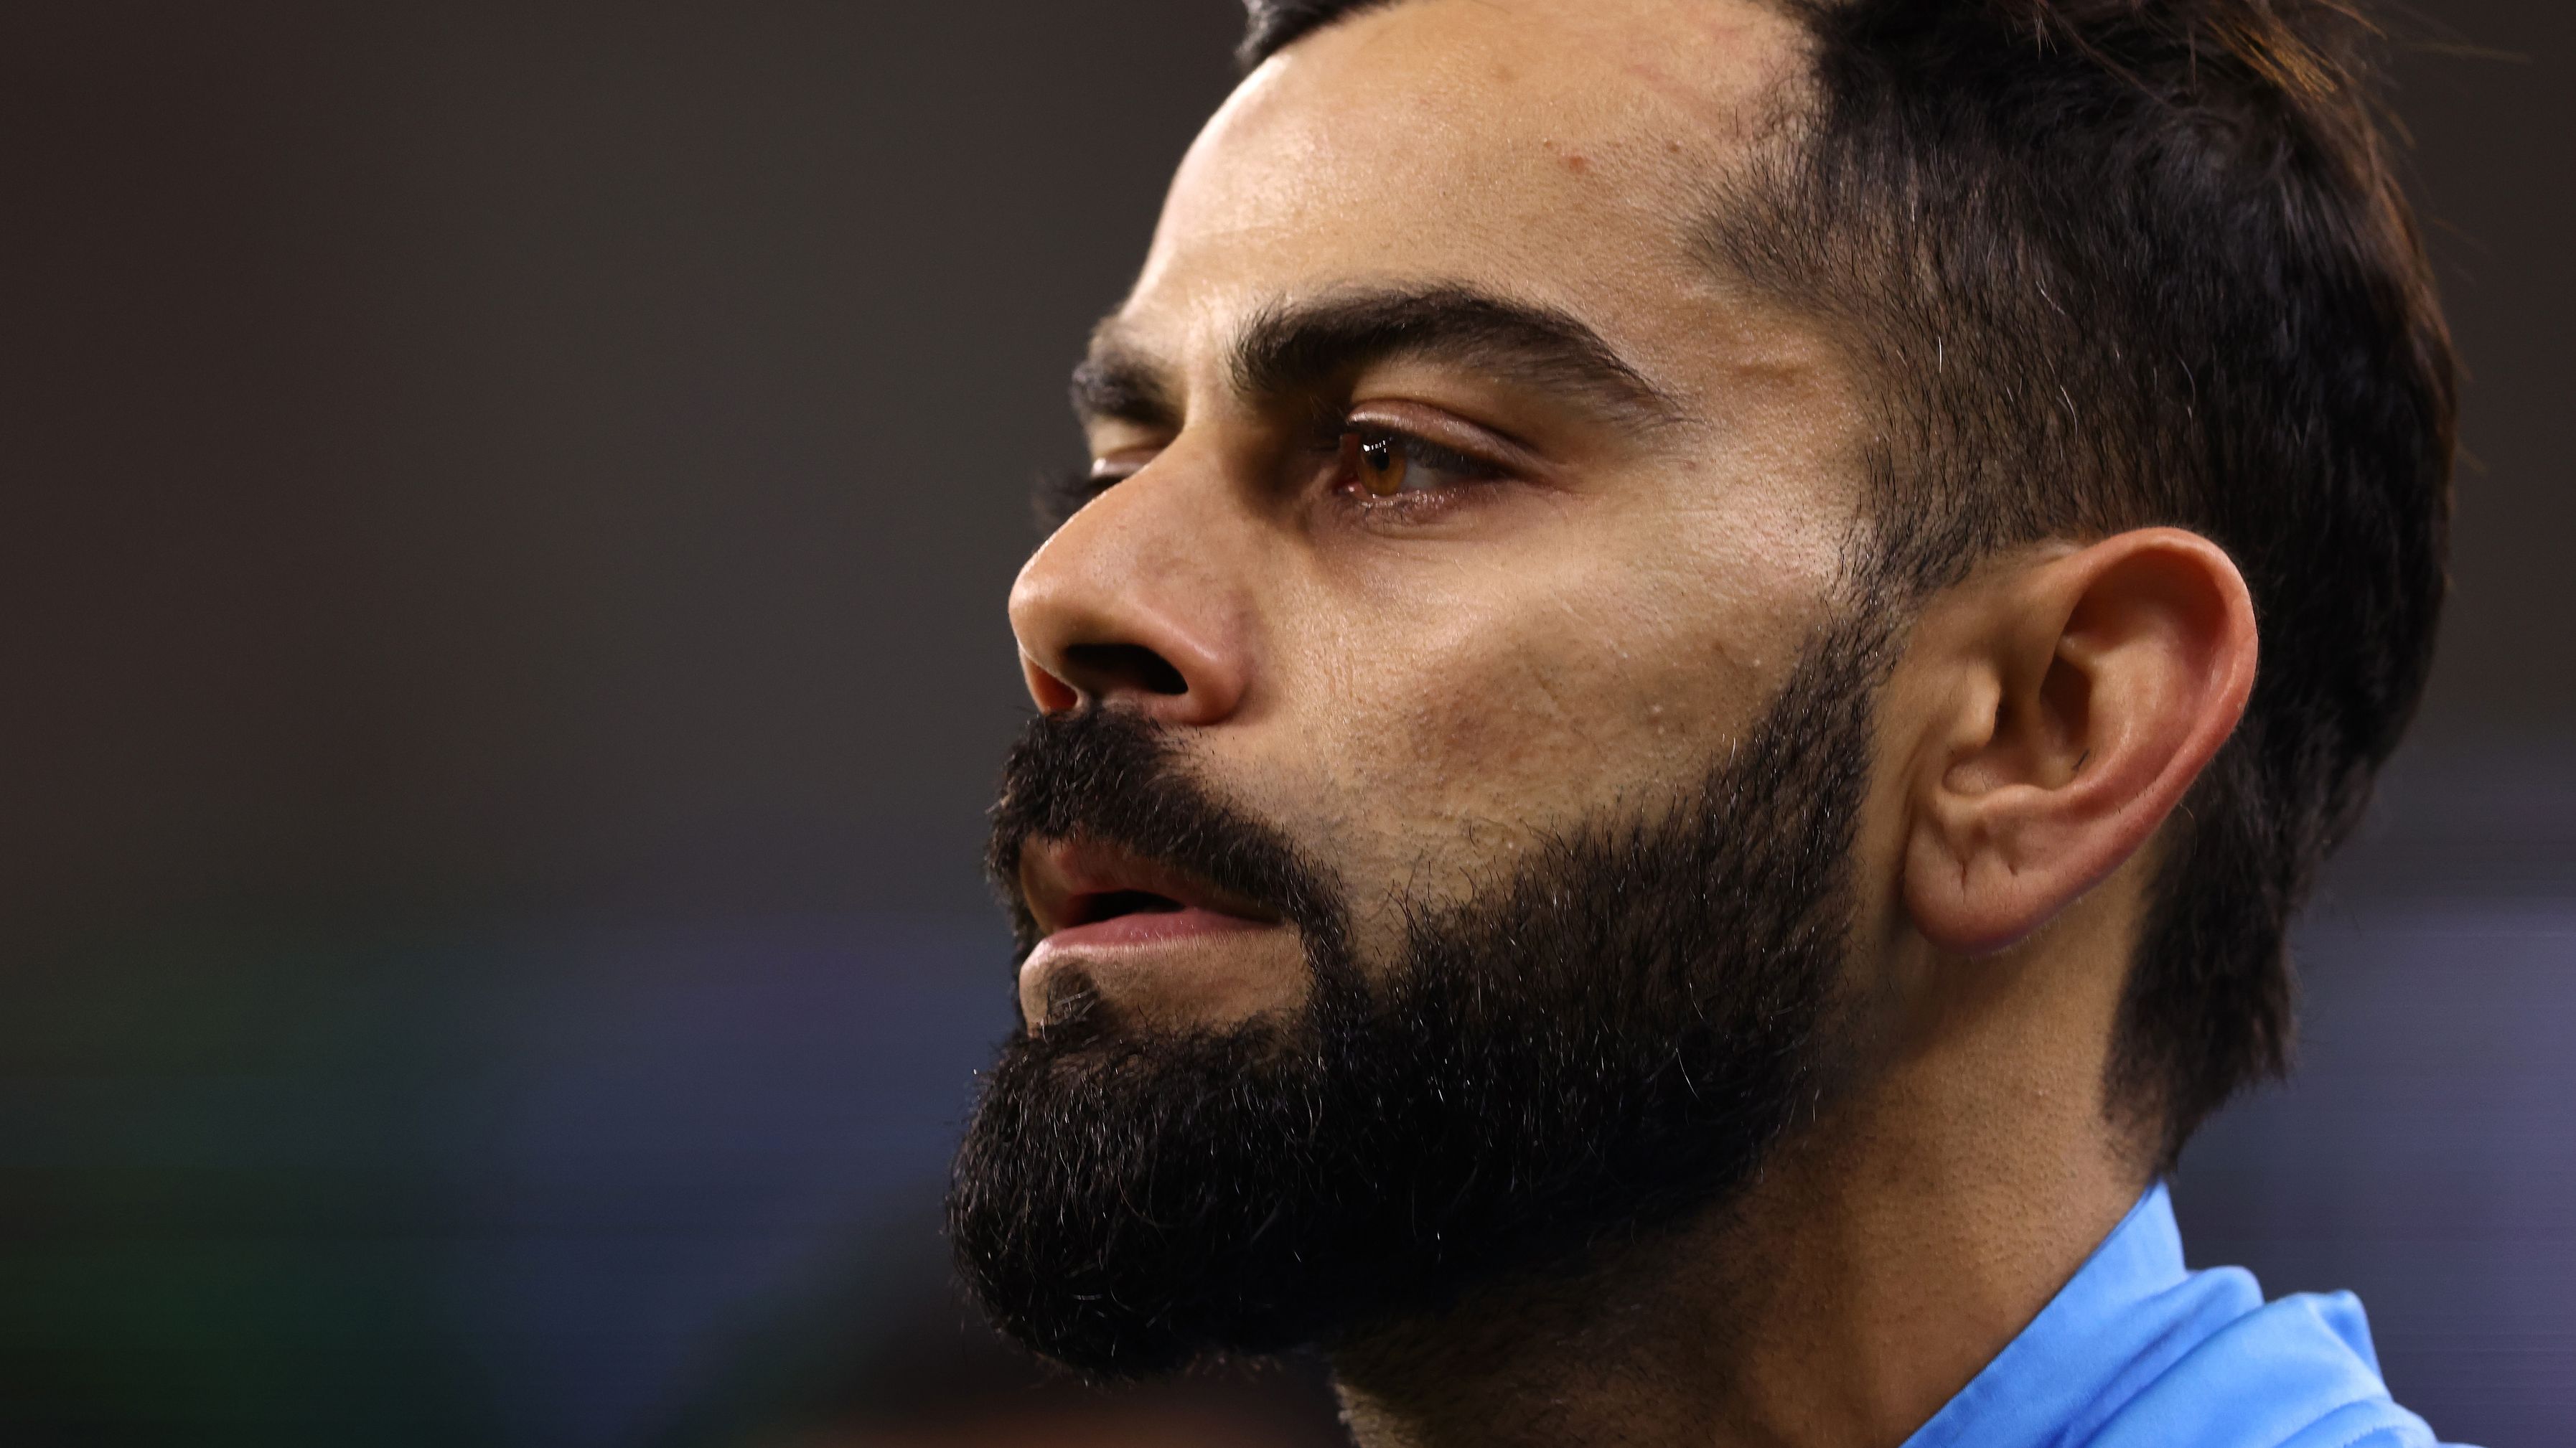 Virat Kohli of India looks on after being defeated during the ICC Men&#x27;s T20 World Cup match between India and South Africa at Perth Stadium on October 30, 2022 in Perth, Australia. (Photo by Paul Kane/Getty Images)